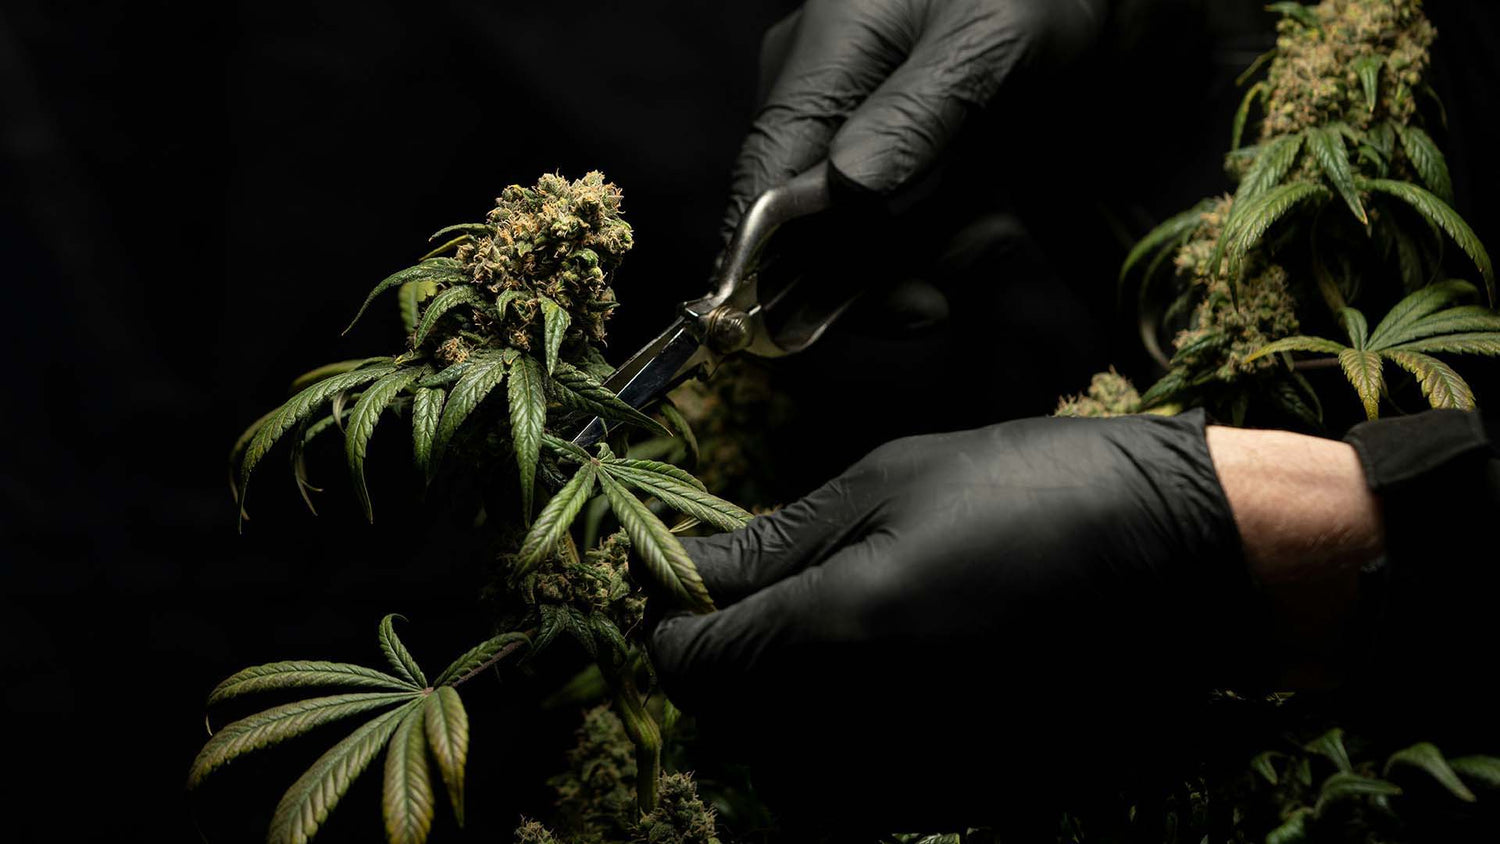 a person wearing black gloves while trimming a cannabis plant